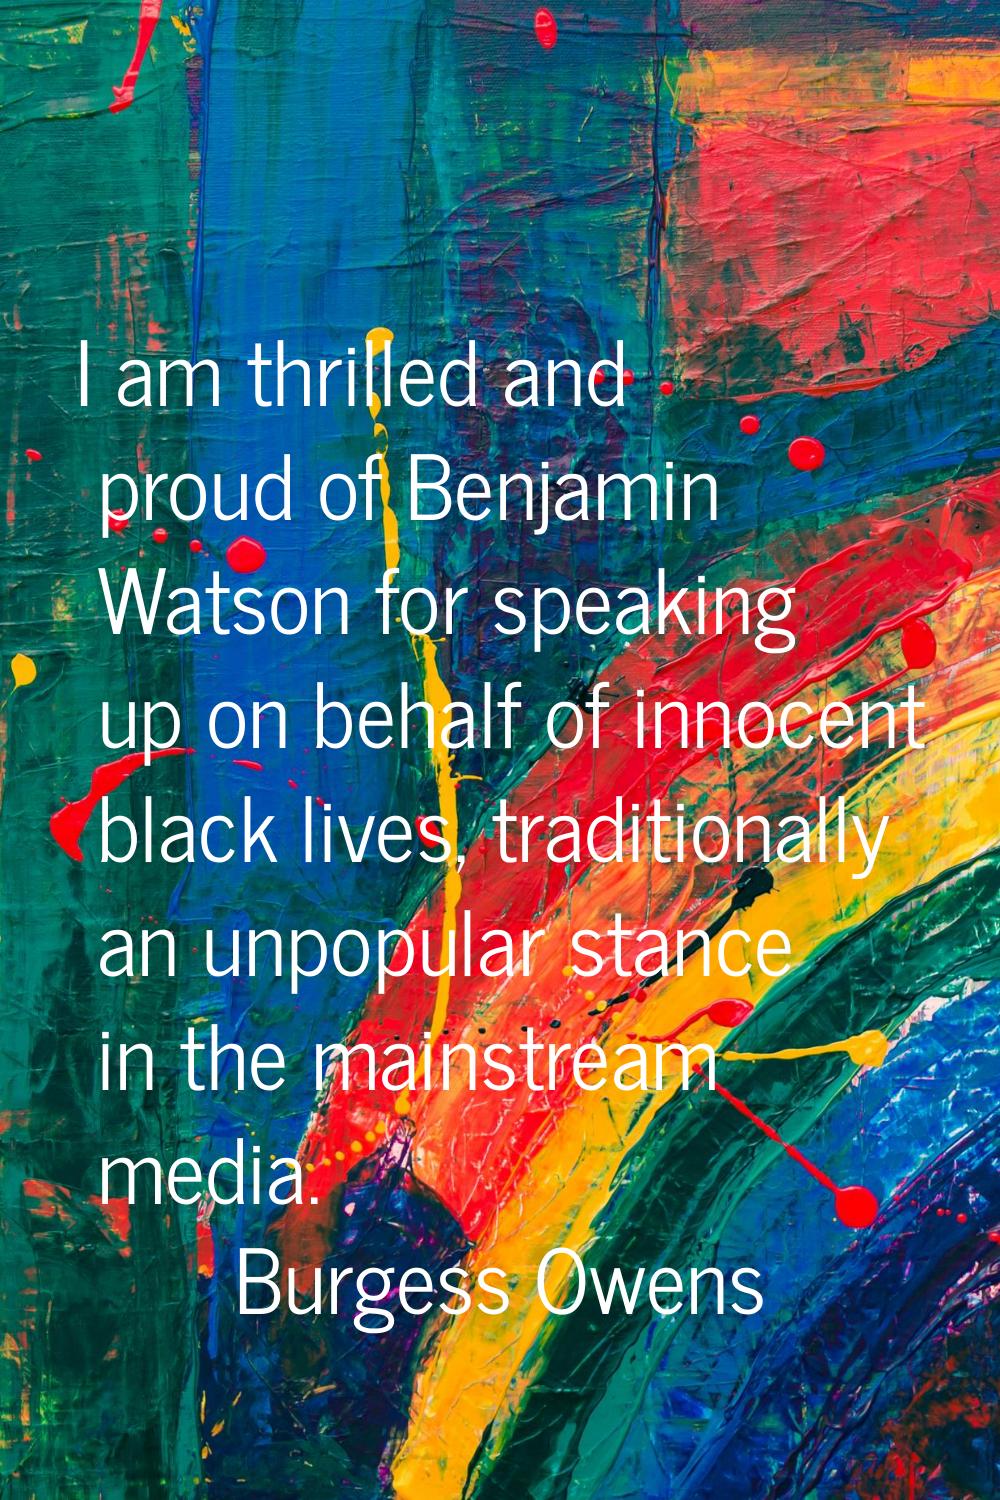 I am thrilled and proud of Benjamin Watson for speaking up on behalf of innocent black lives, tradi